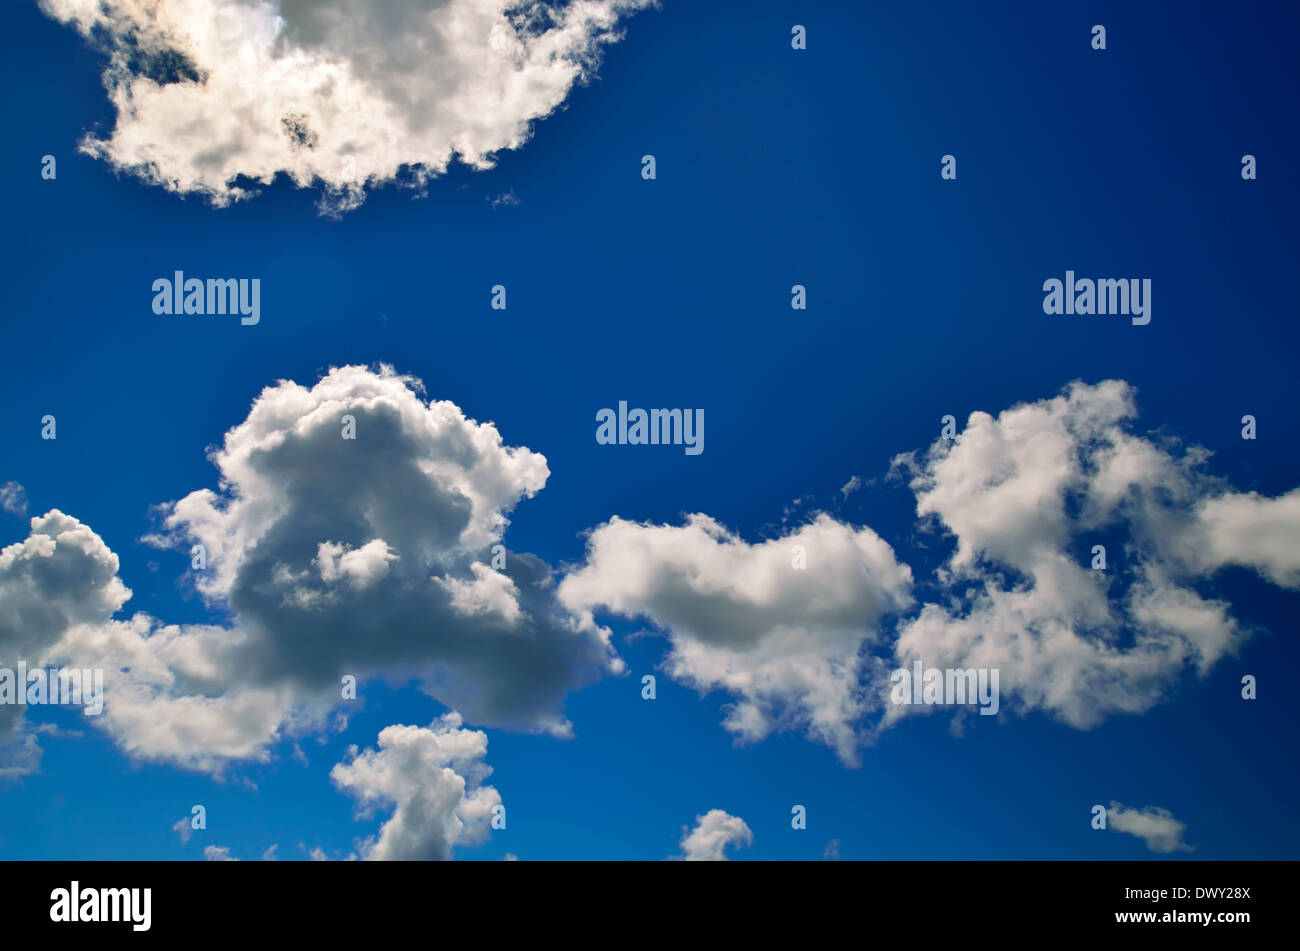 Summer heavenly landscape with dramatic cumulonimbus clouds Stock Photo